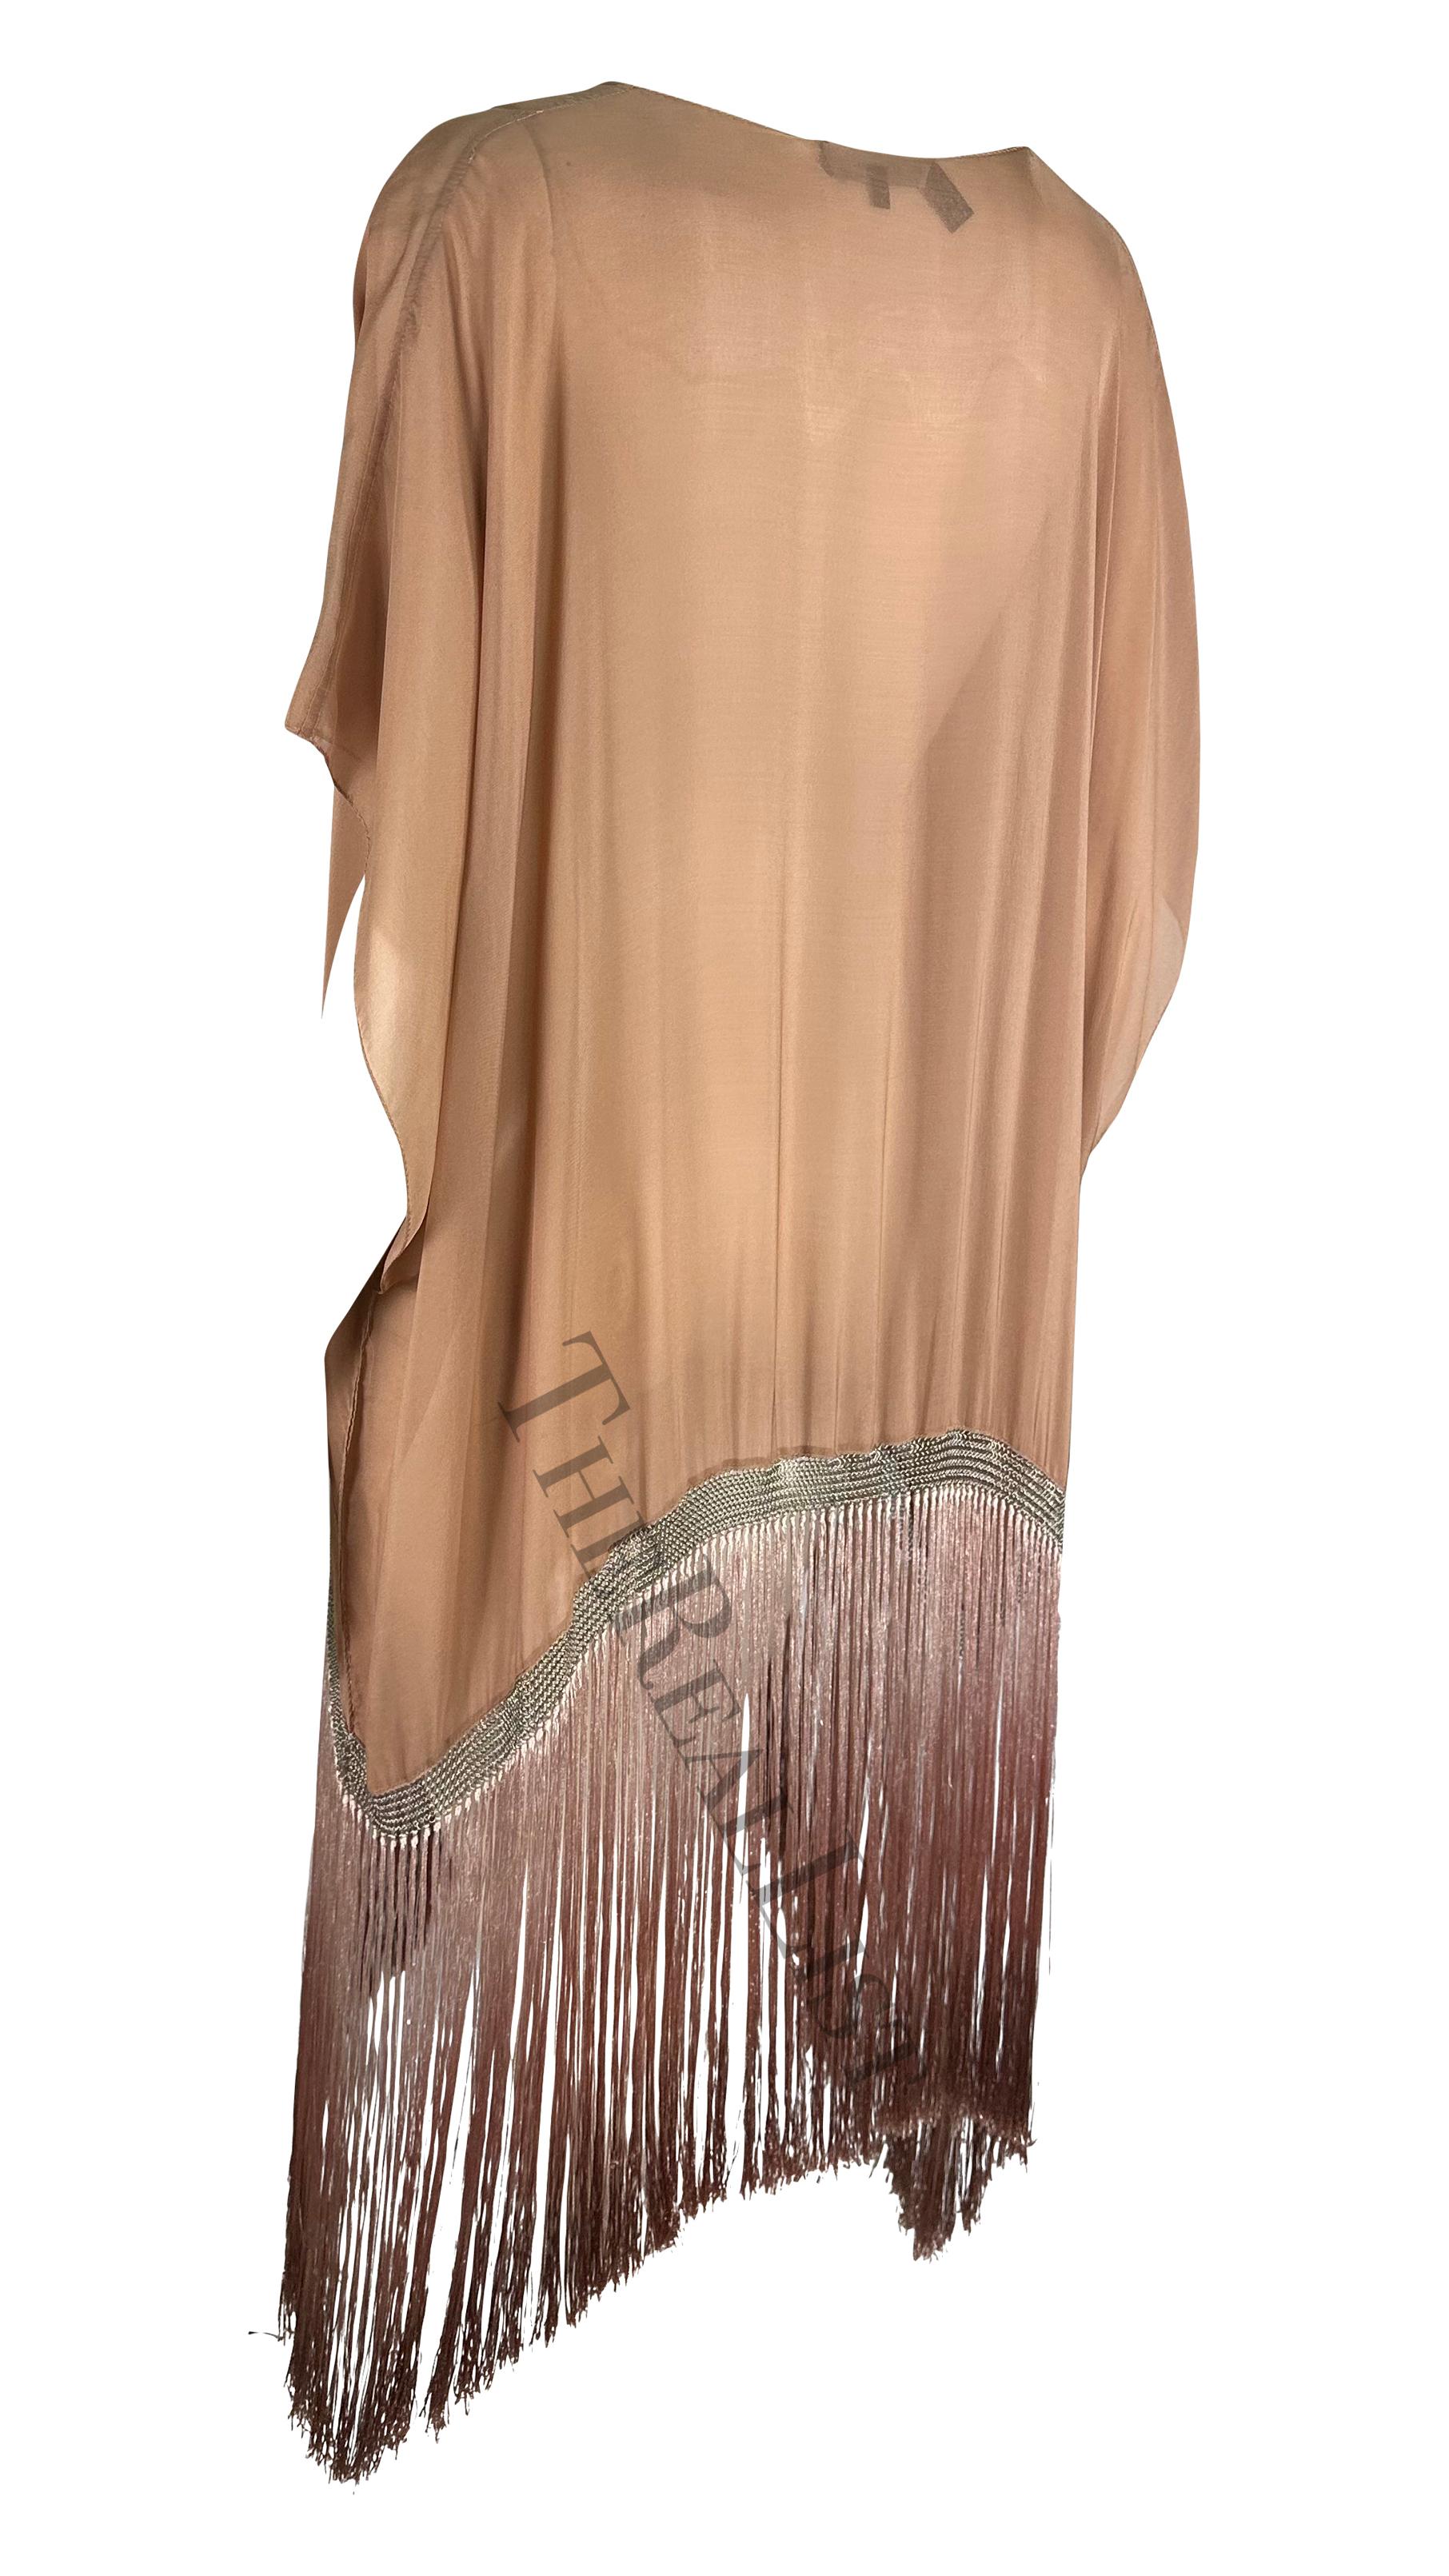 S/S 2004 Gucci by Tom Ford Chain Link Peach Ombré Fringe Kaftan Cover Up  1